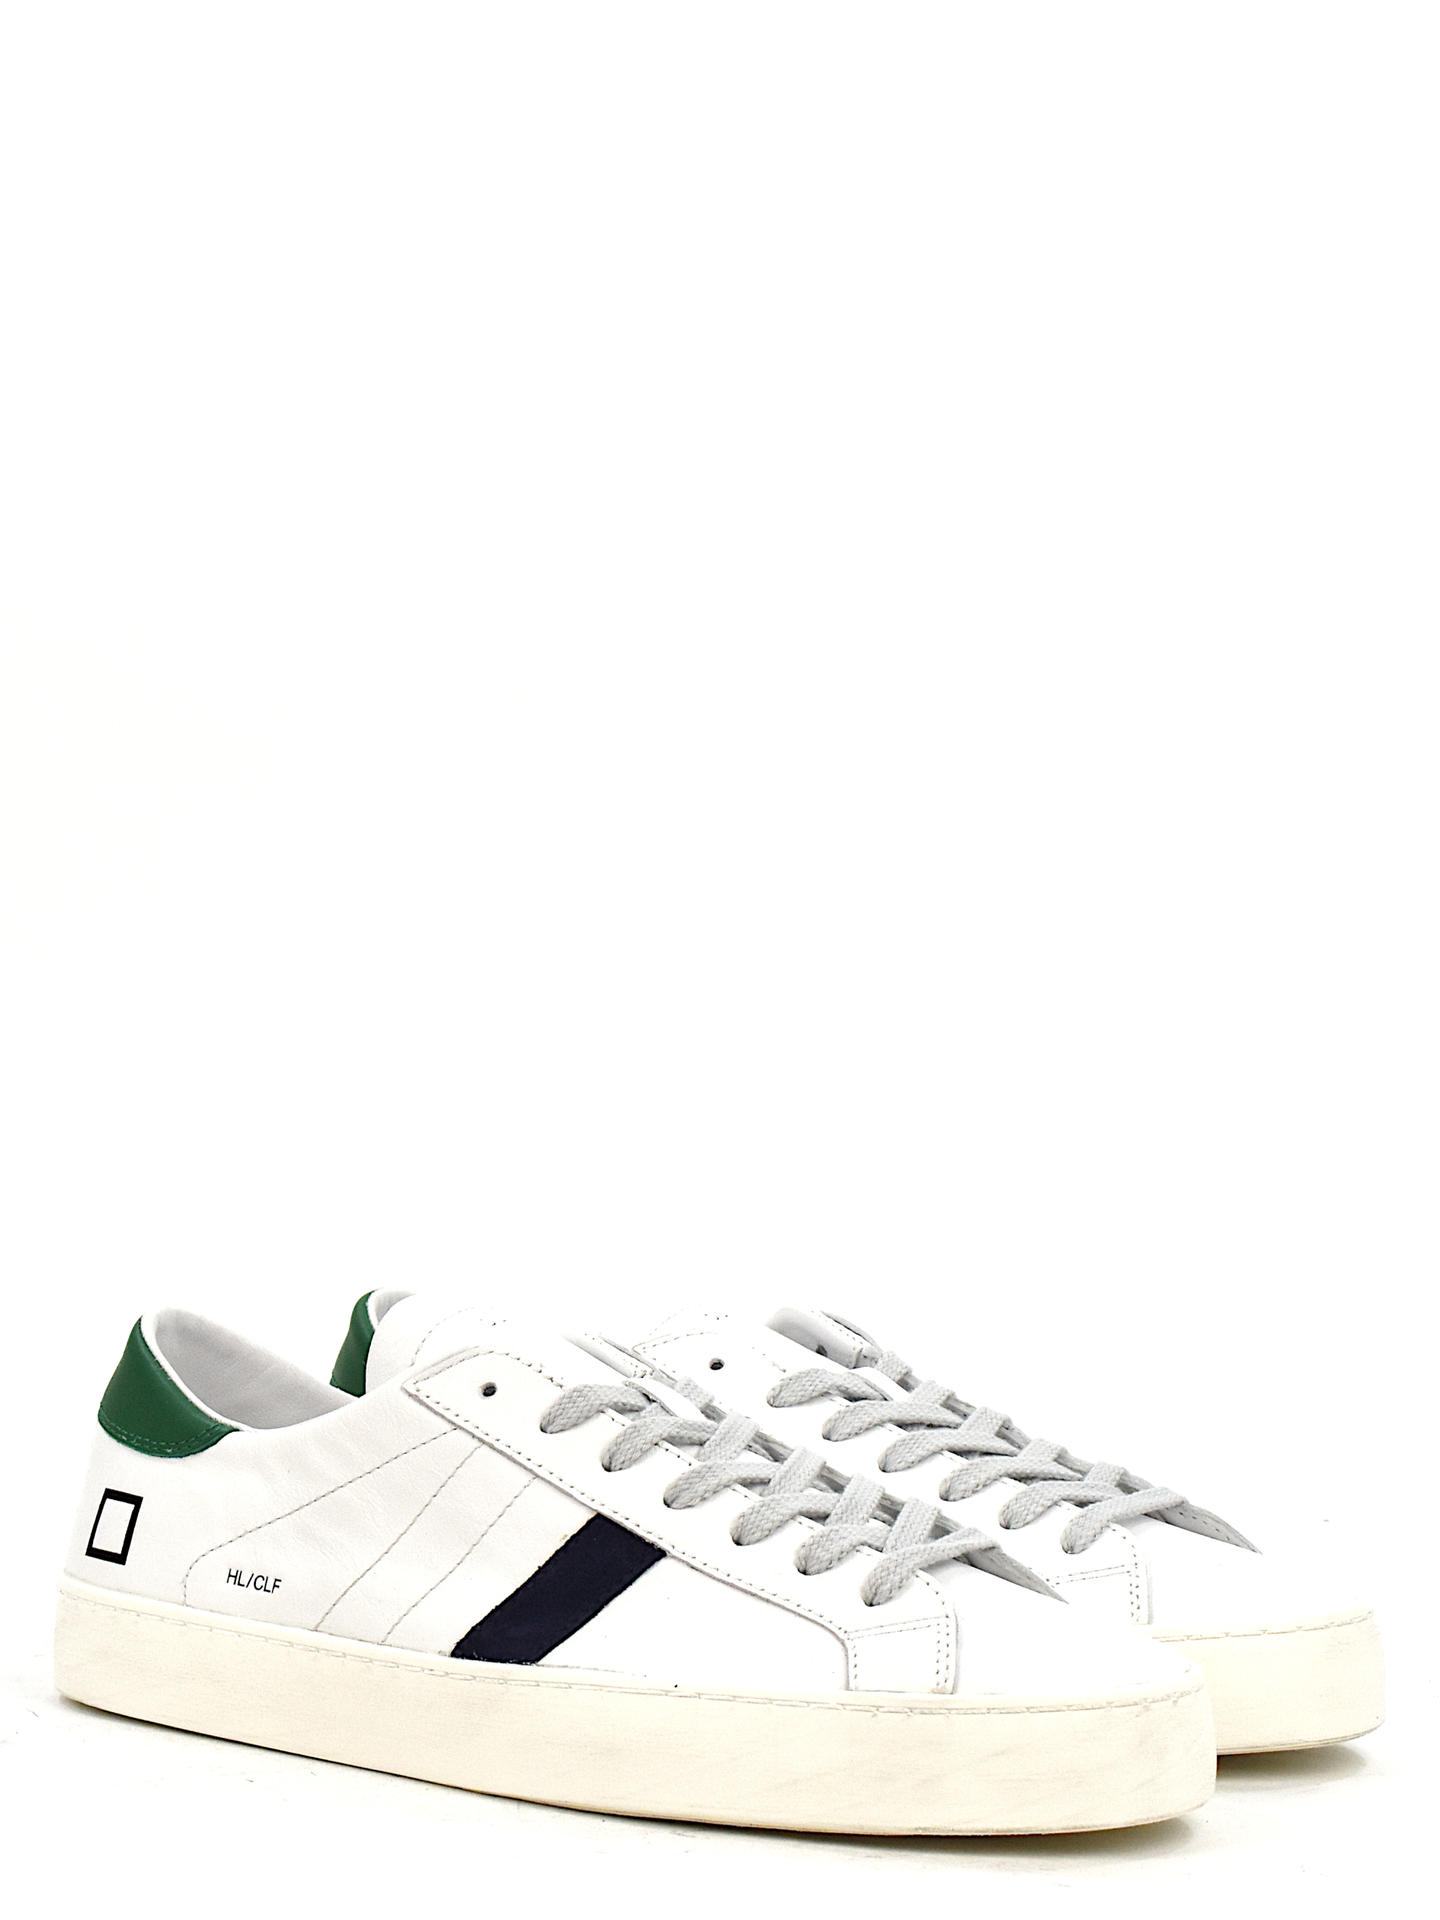 SNEAKERS D.A.T.E HLCAWGW BIANCO/VERDE